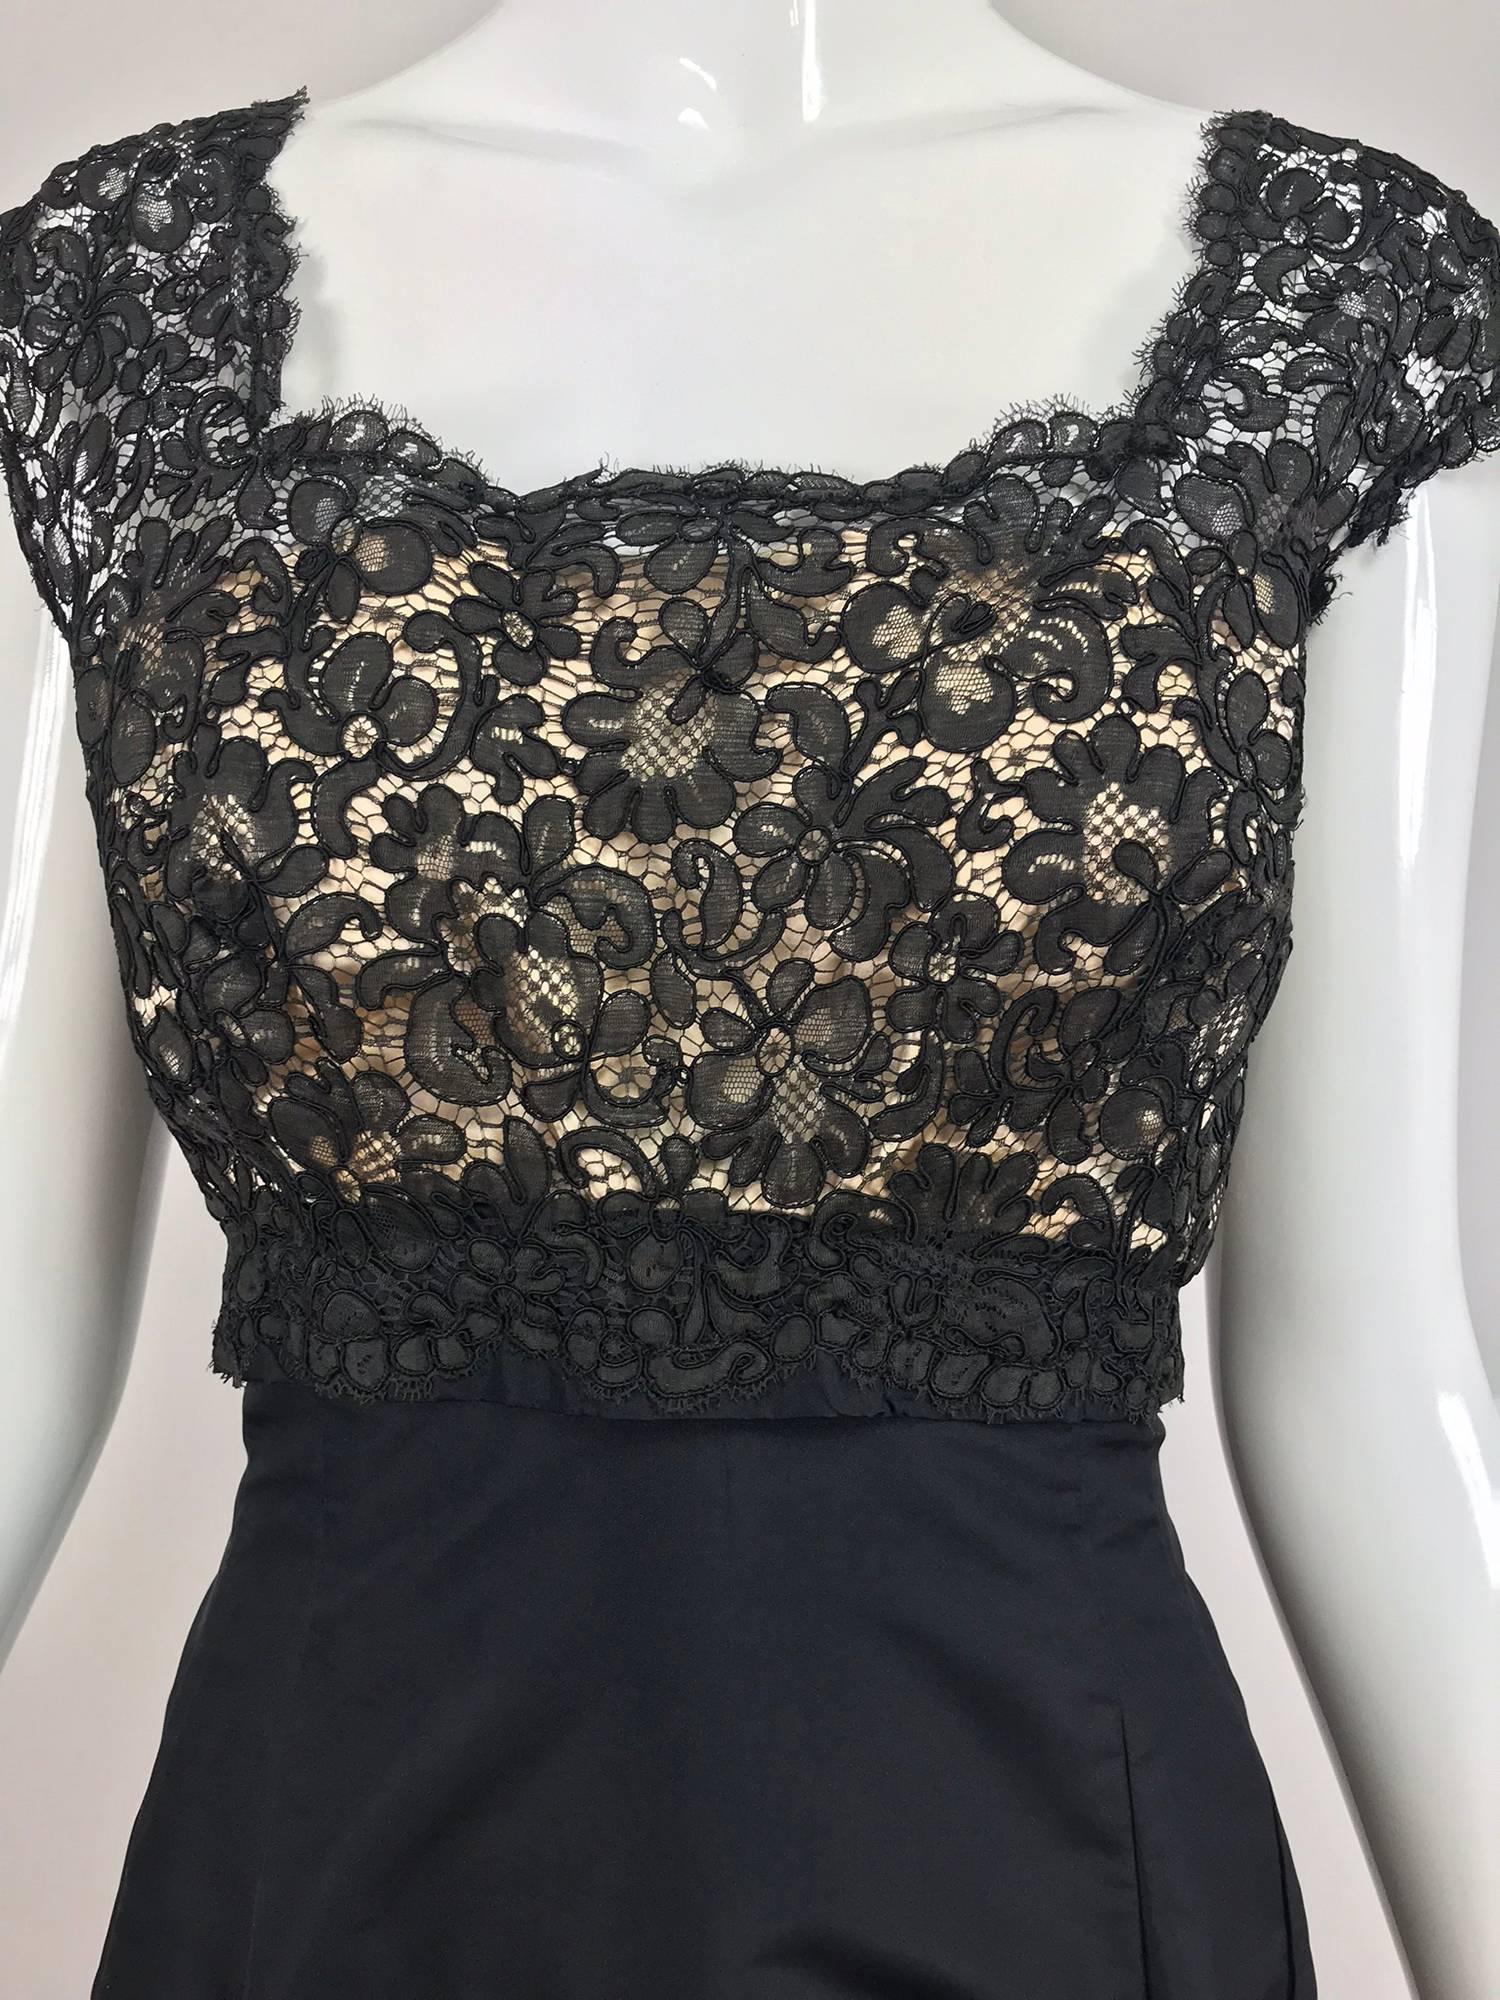 Vintage 1950s black silk and lace cocktail dress, beautifully made dress in a classic late 1950s style. The black Guipure lace bodice is lined with sheer nude fabric, the shoulder straps are wide and cover the shoulder top edge. The attached skirt